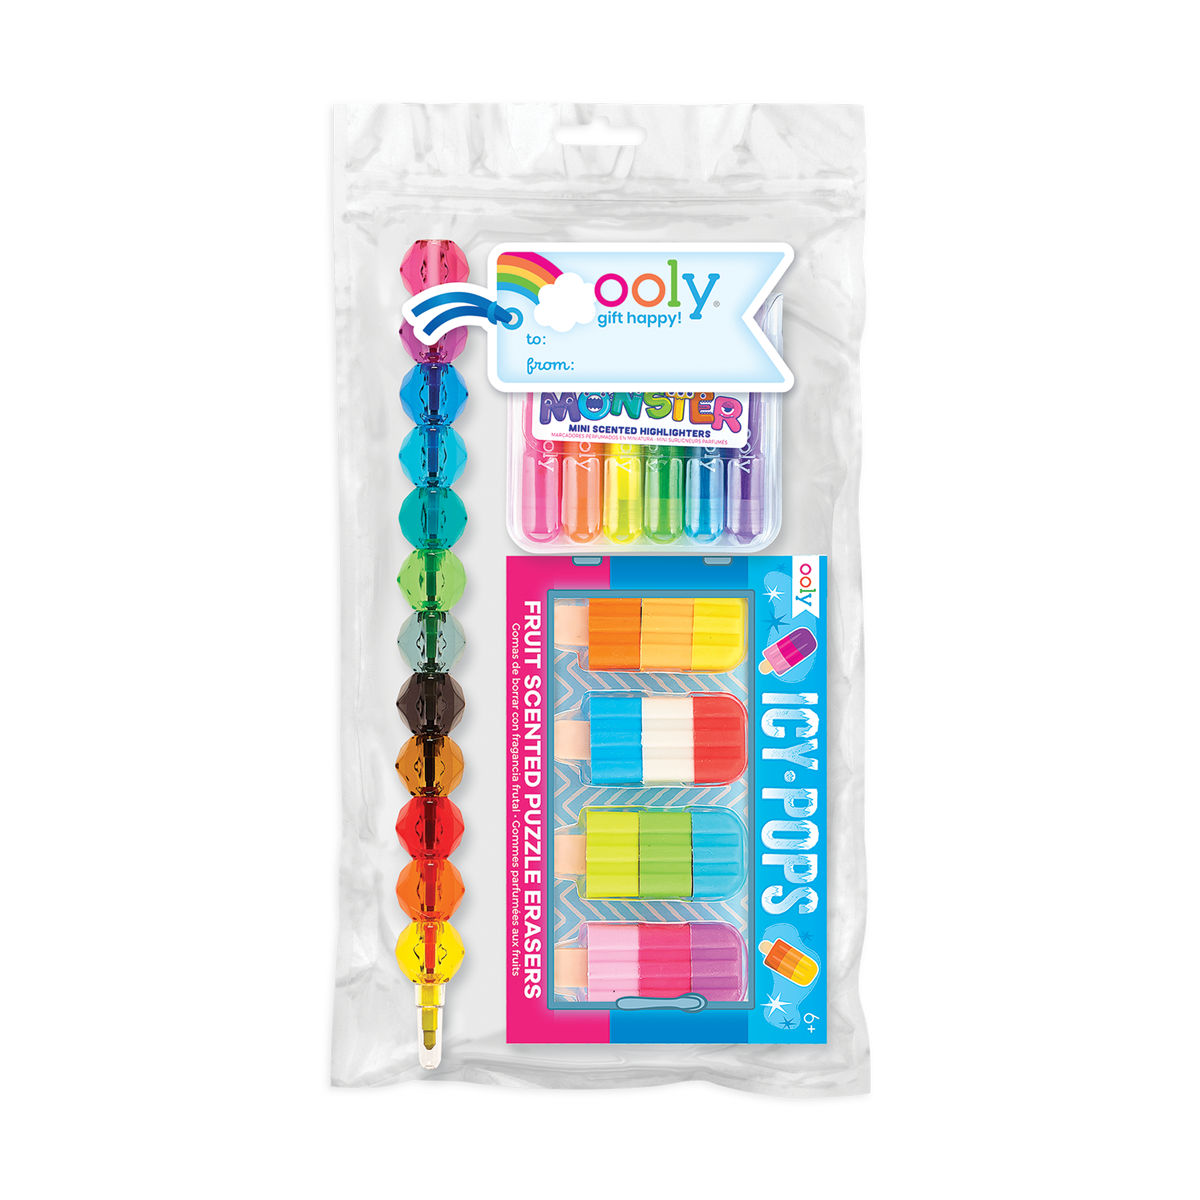 OOLY Rainbow Desk Pals Happy Pack  in pouch